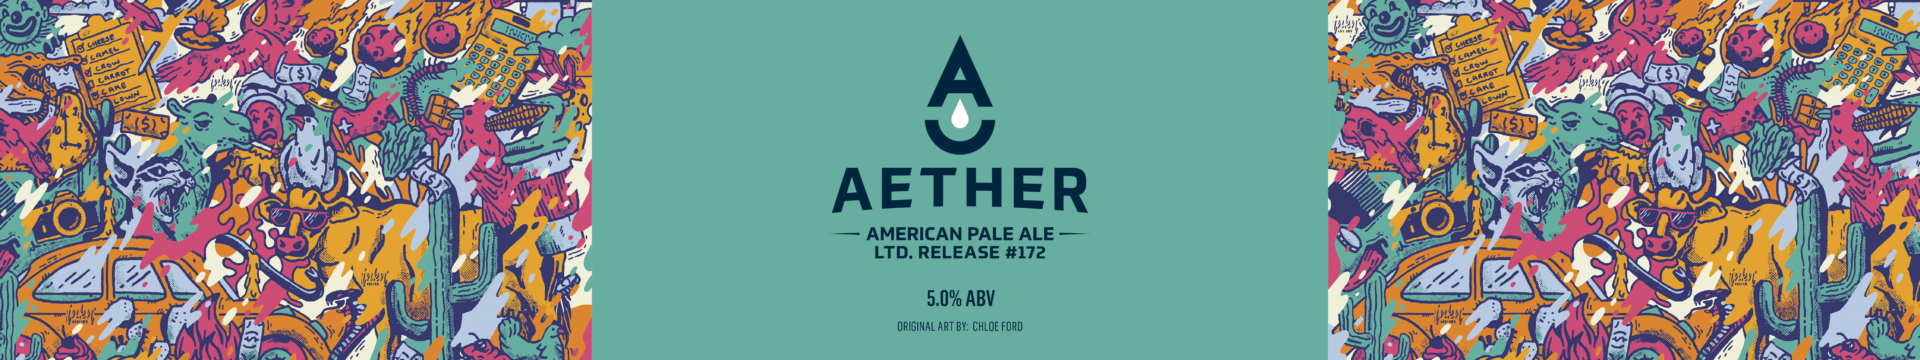 Aether #172 American Pale Ale Banner